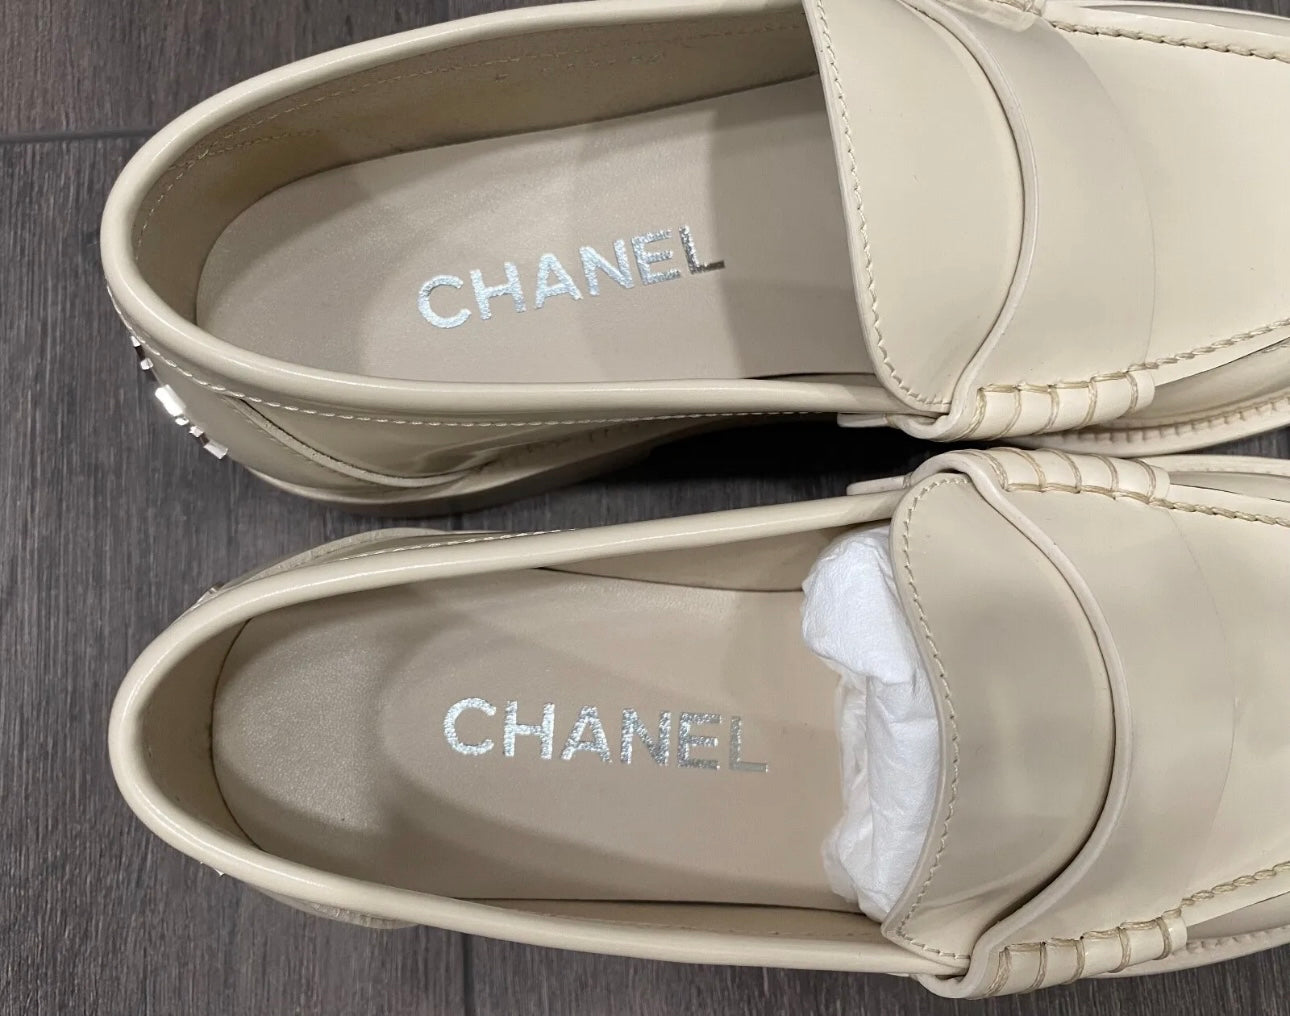 CHANEL IVORY SHINY LEATHER LOAFERS OXFORD SHOES